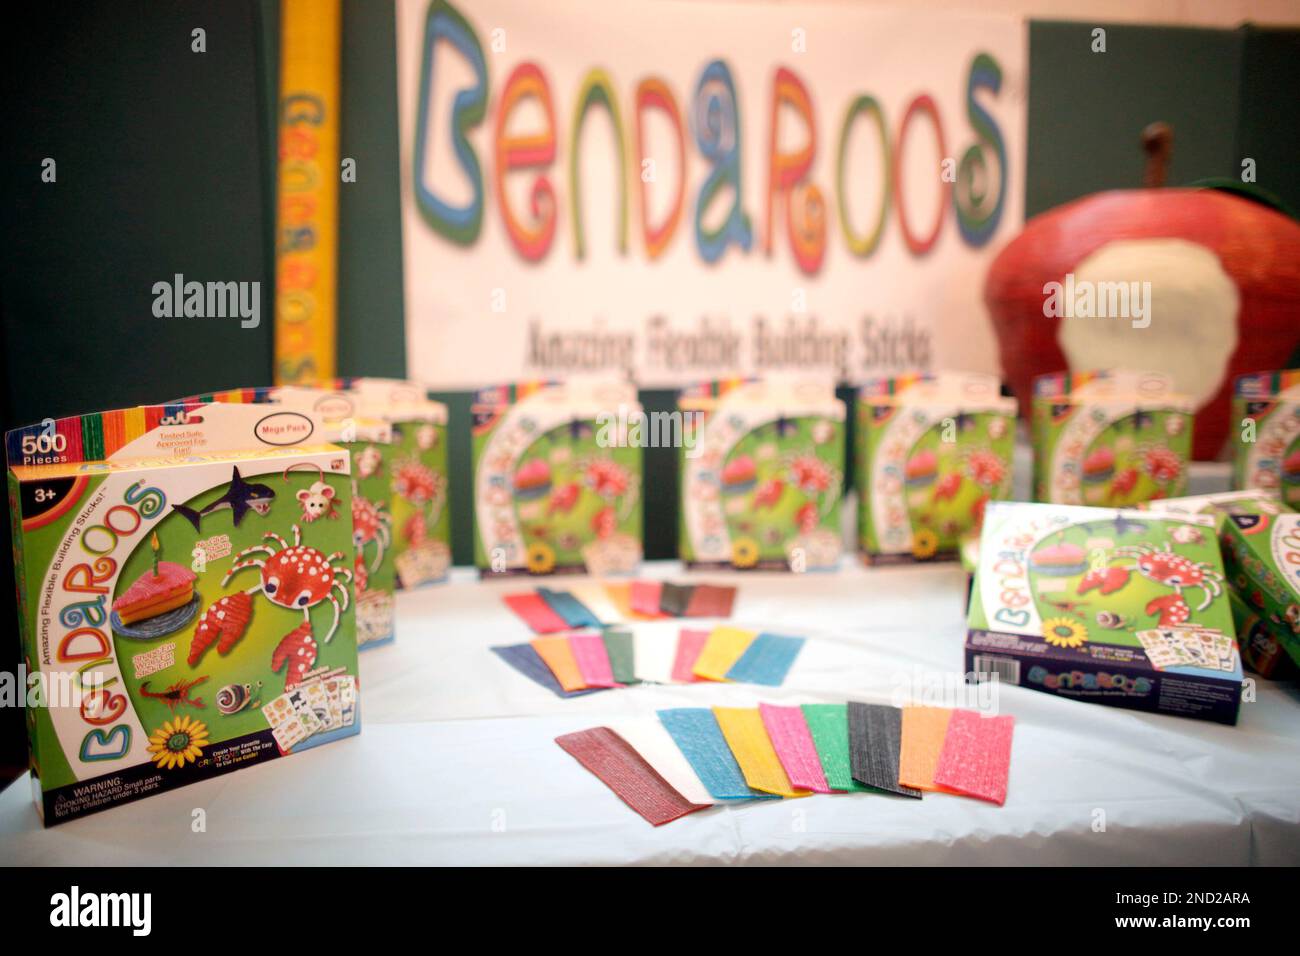 Bendaroos product is seen at the New York Parks & Recreation's